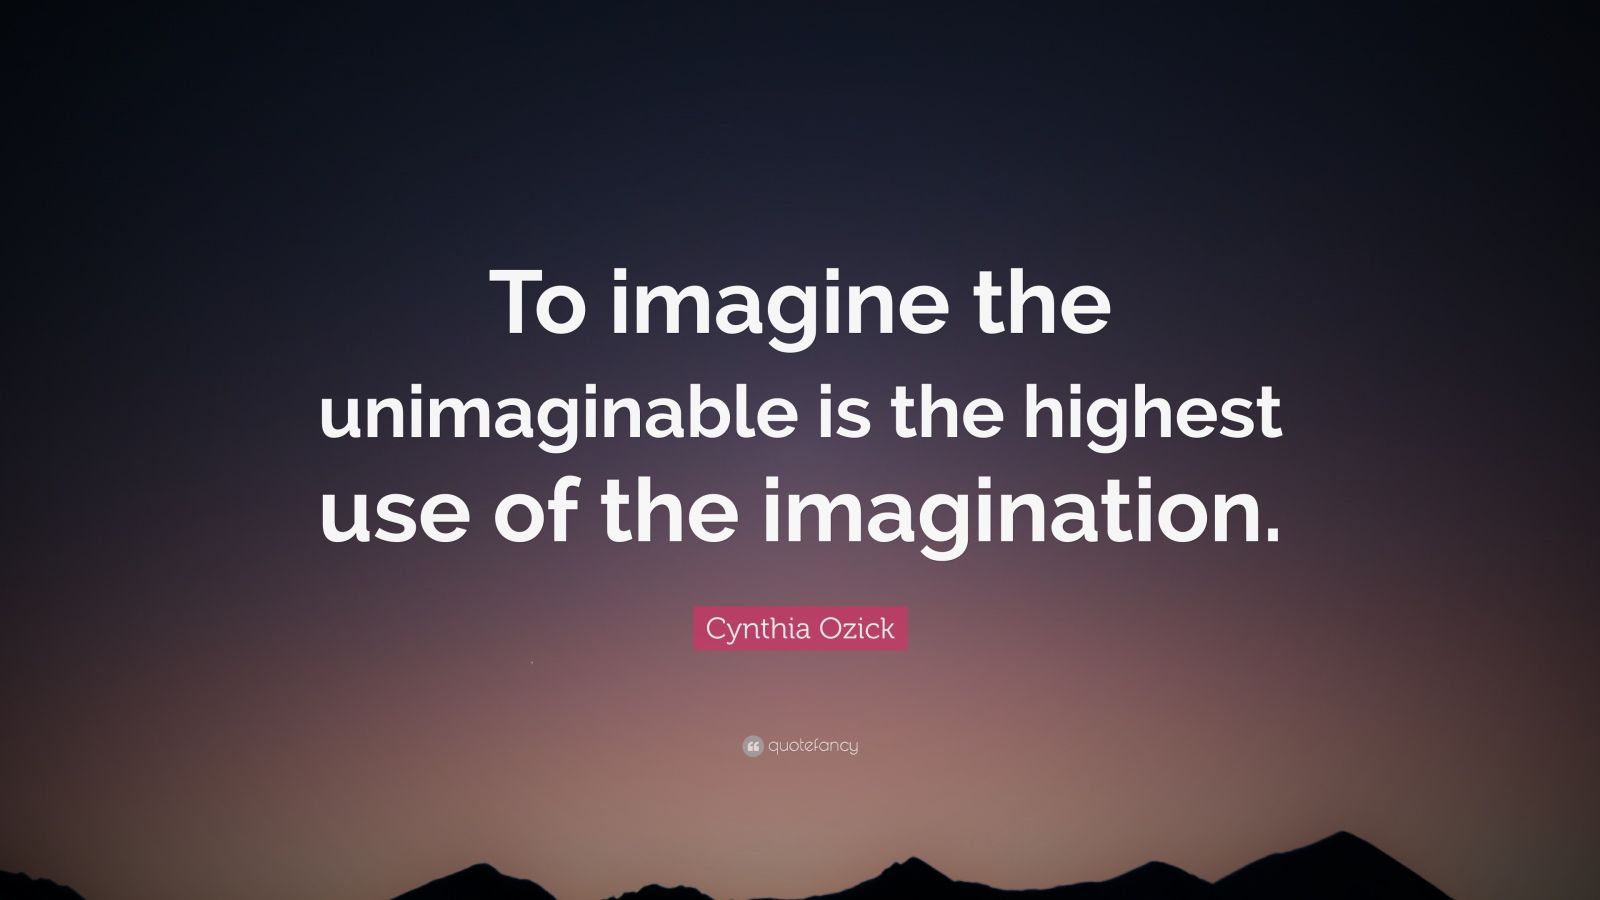 Cynthia Ozick Quote: “To imagine the unimaginable is the highest use of ...